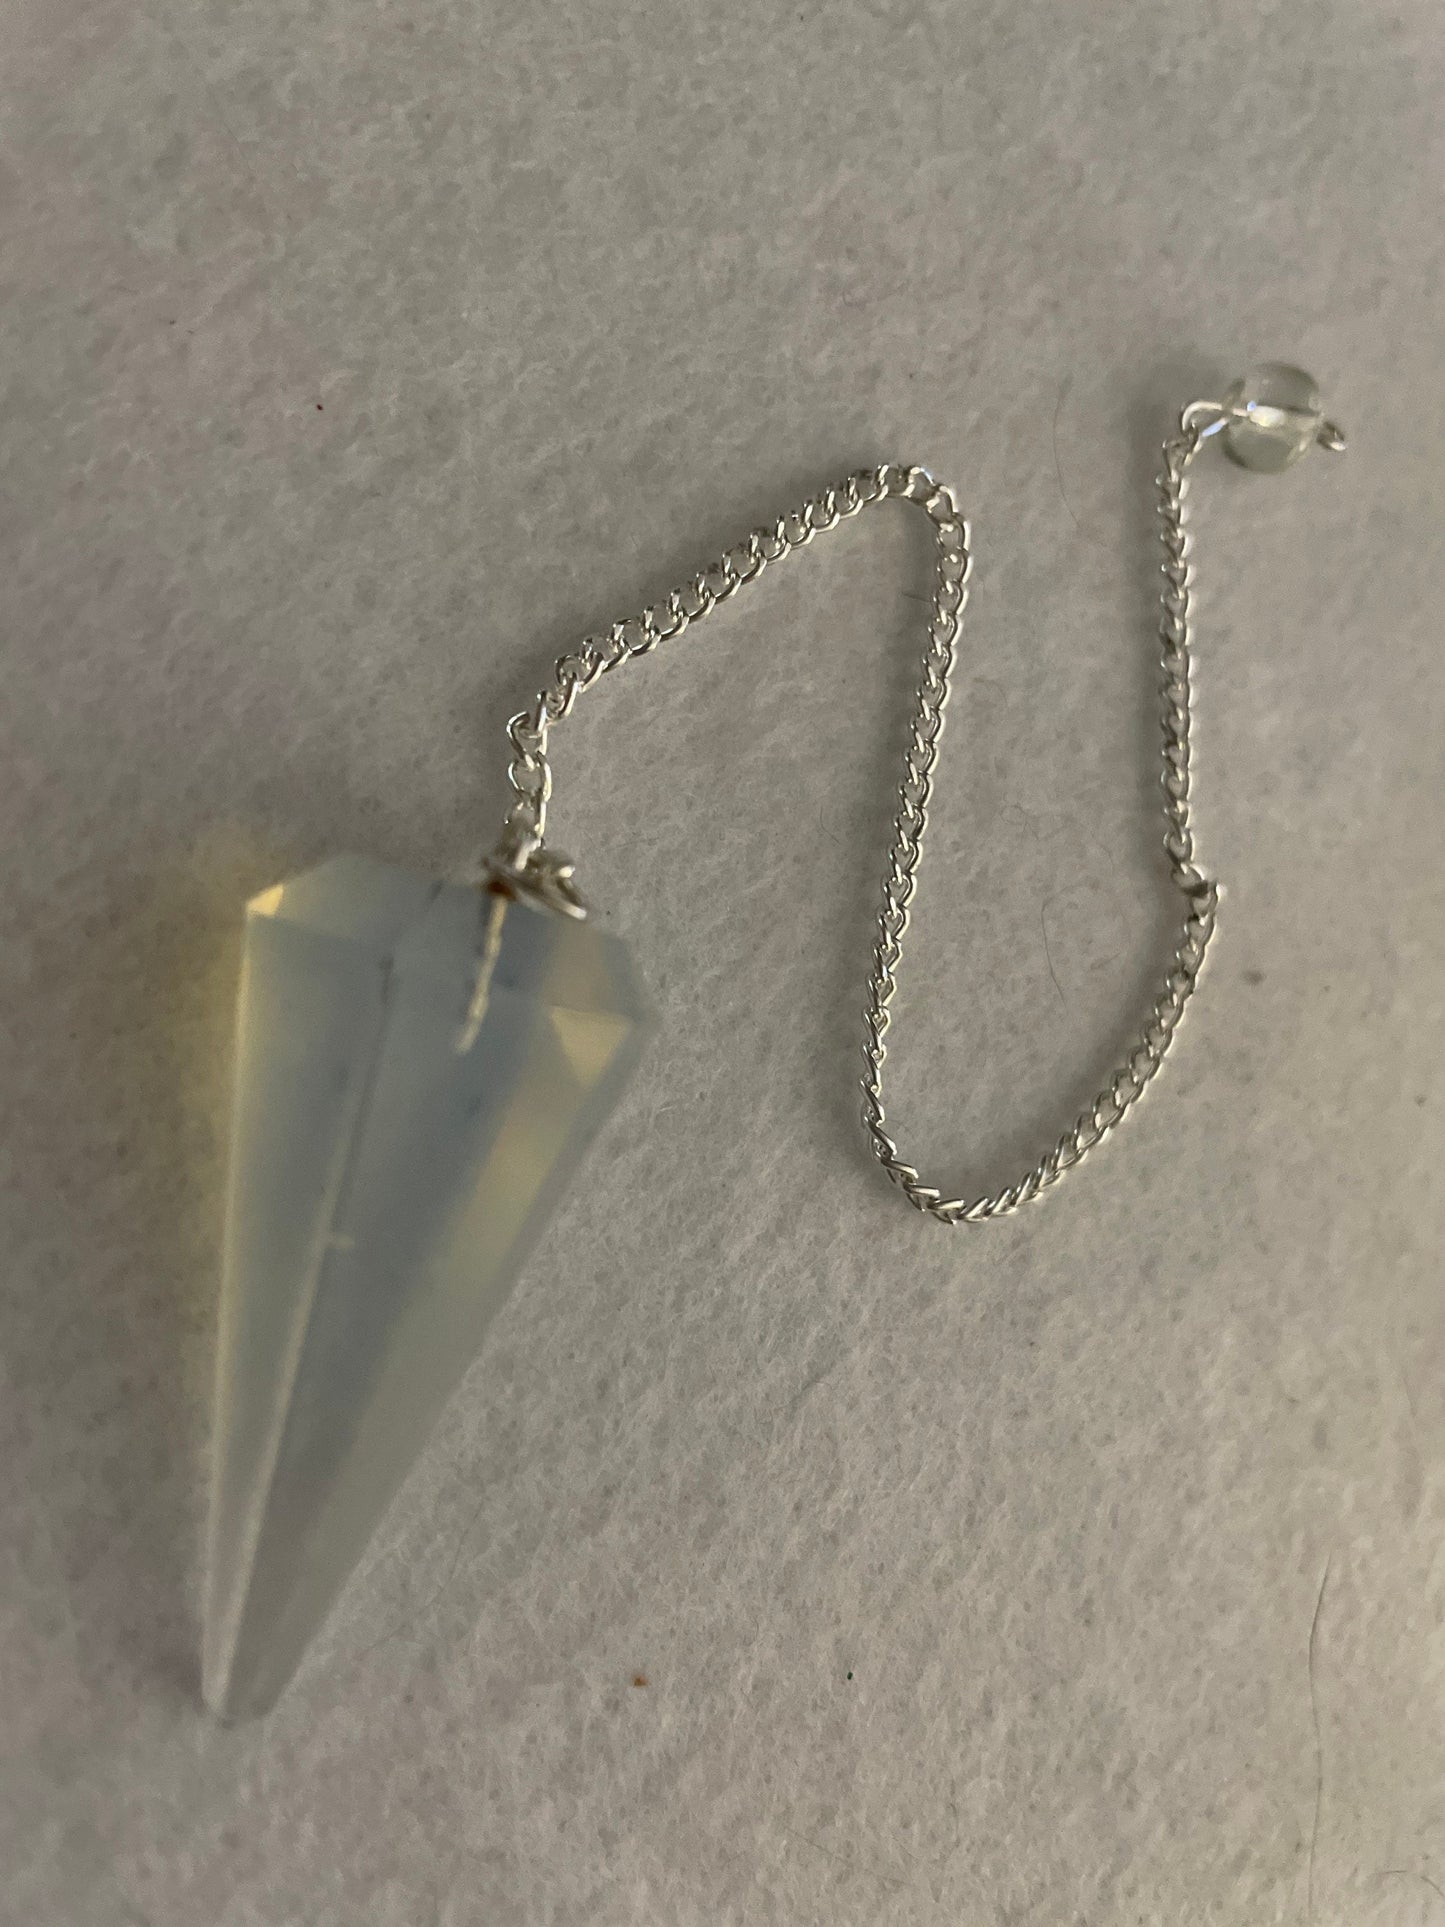 This beautiful  Opalite pendulum is approximately 1.5” and with chain is 8.25”